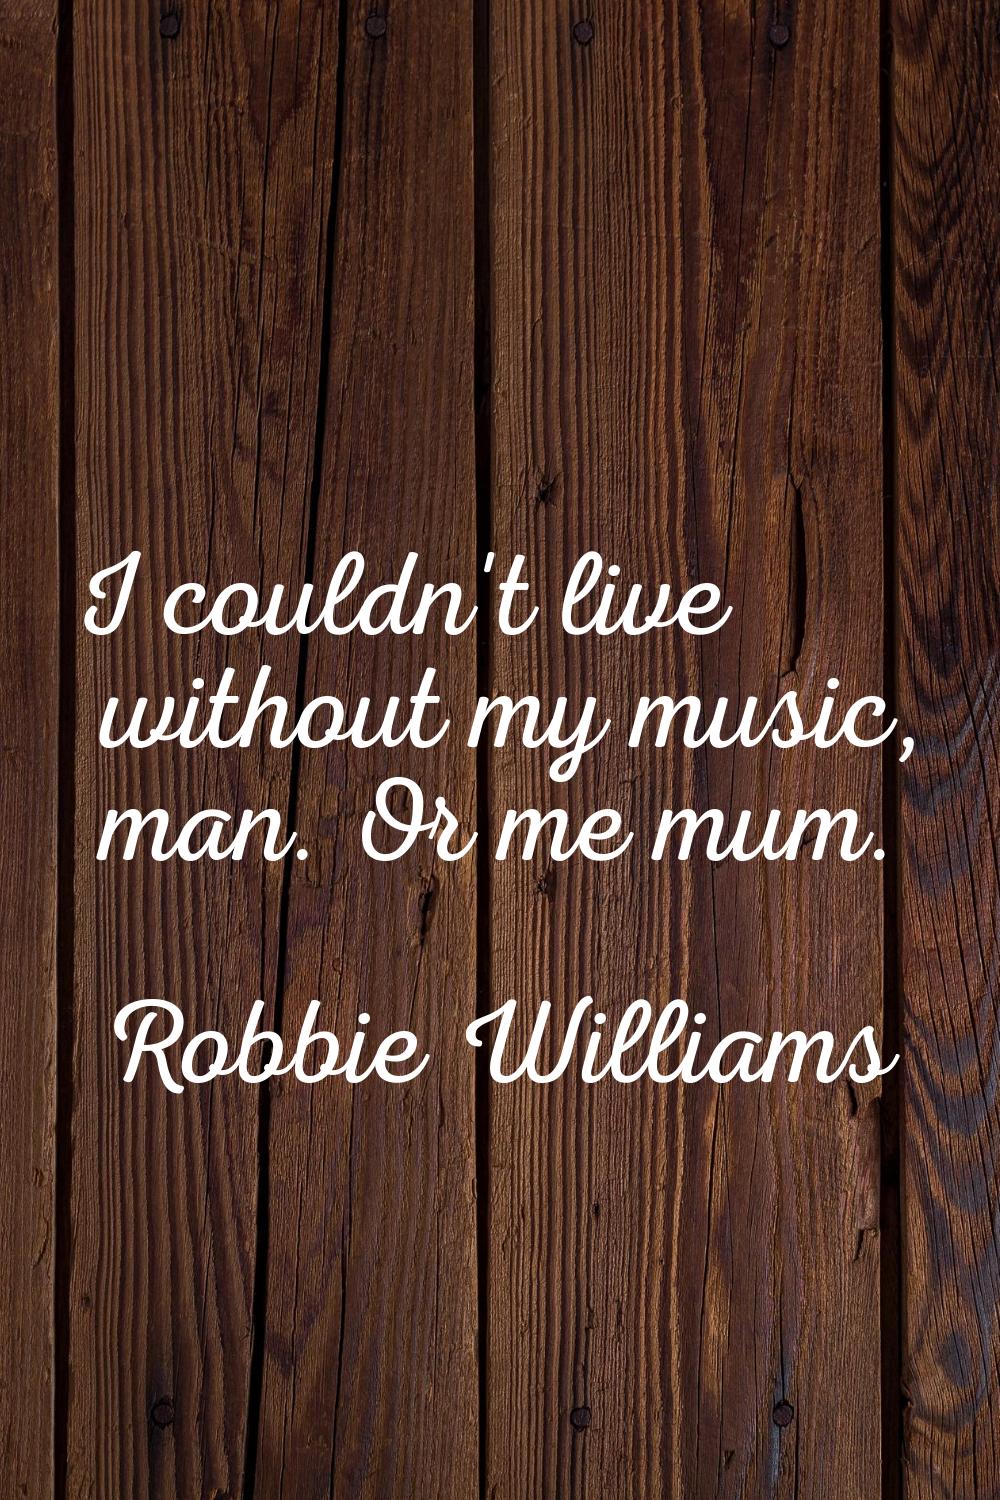 I couldn't live without my music, man. Or me mum.